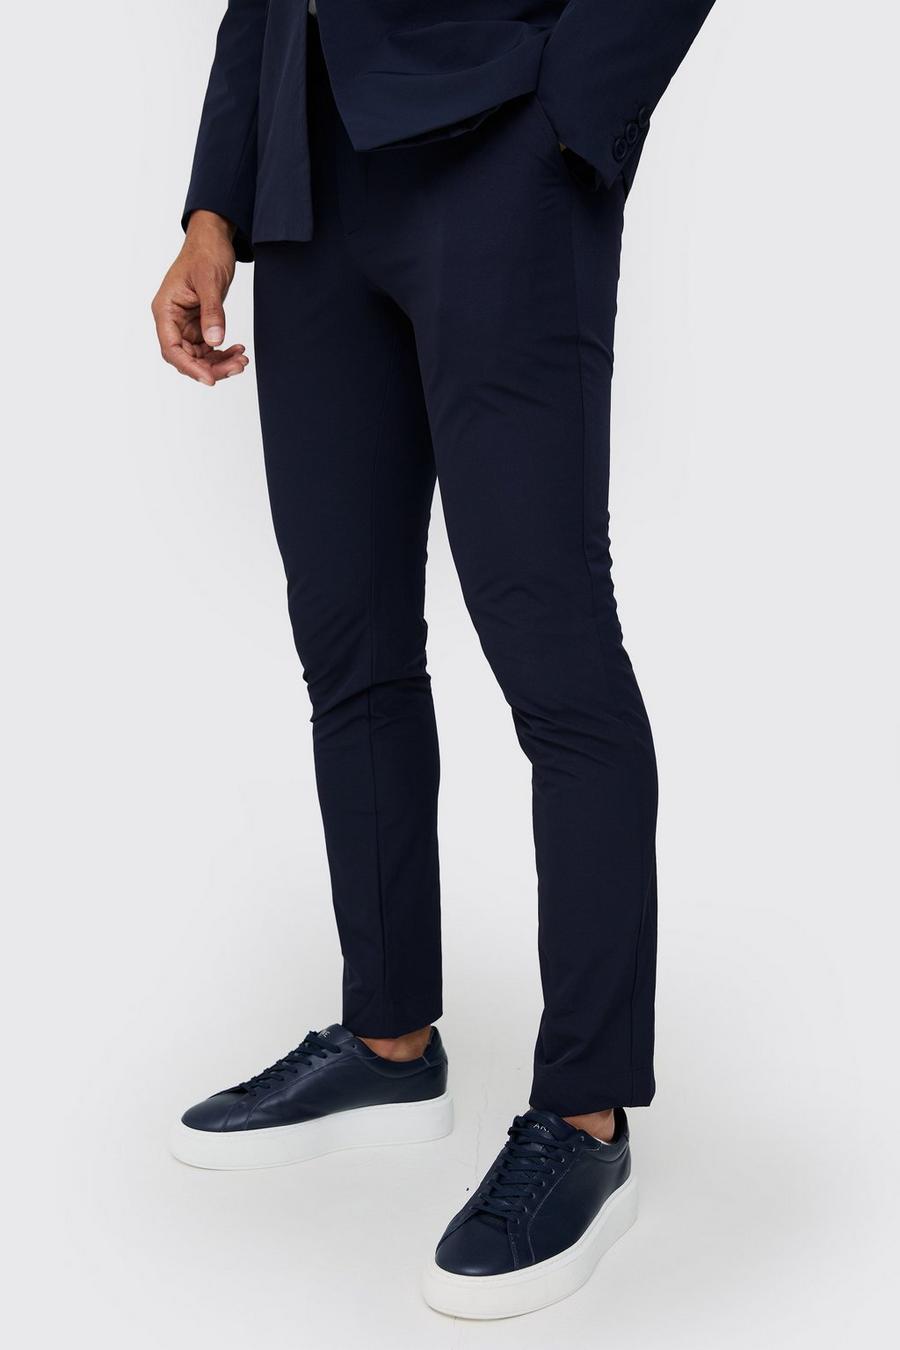 Navy Stretch Tailored Slim Fit Pants